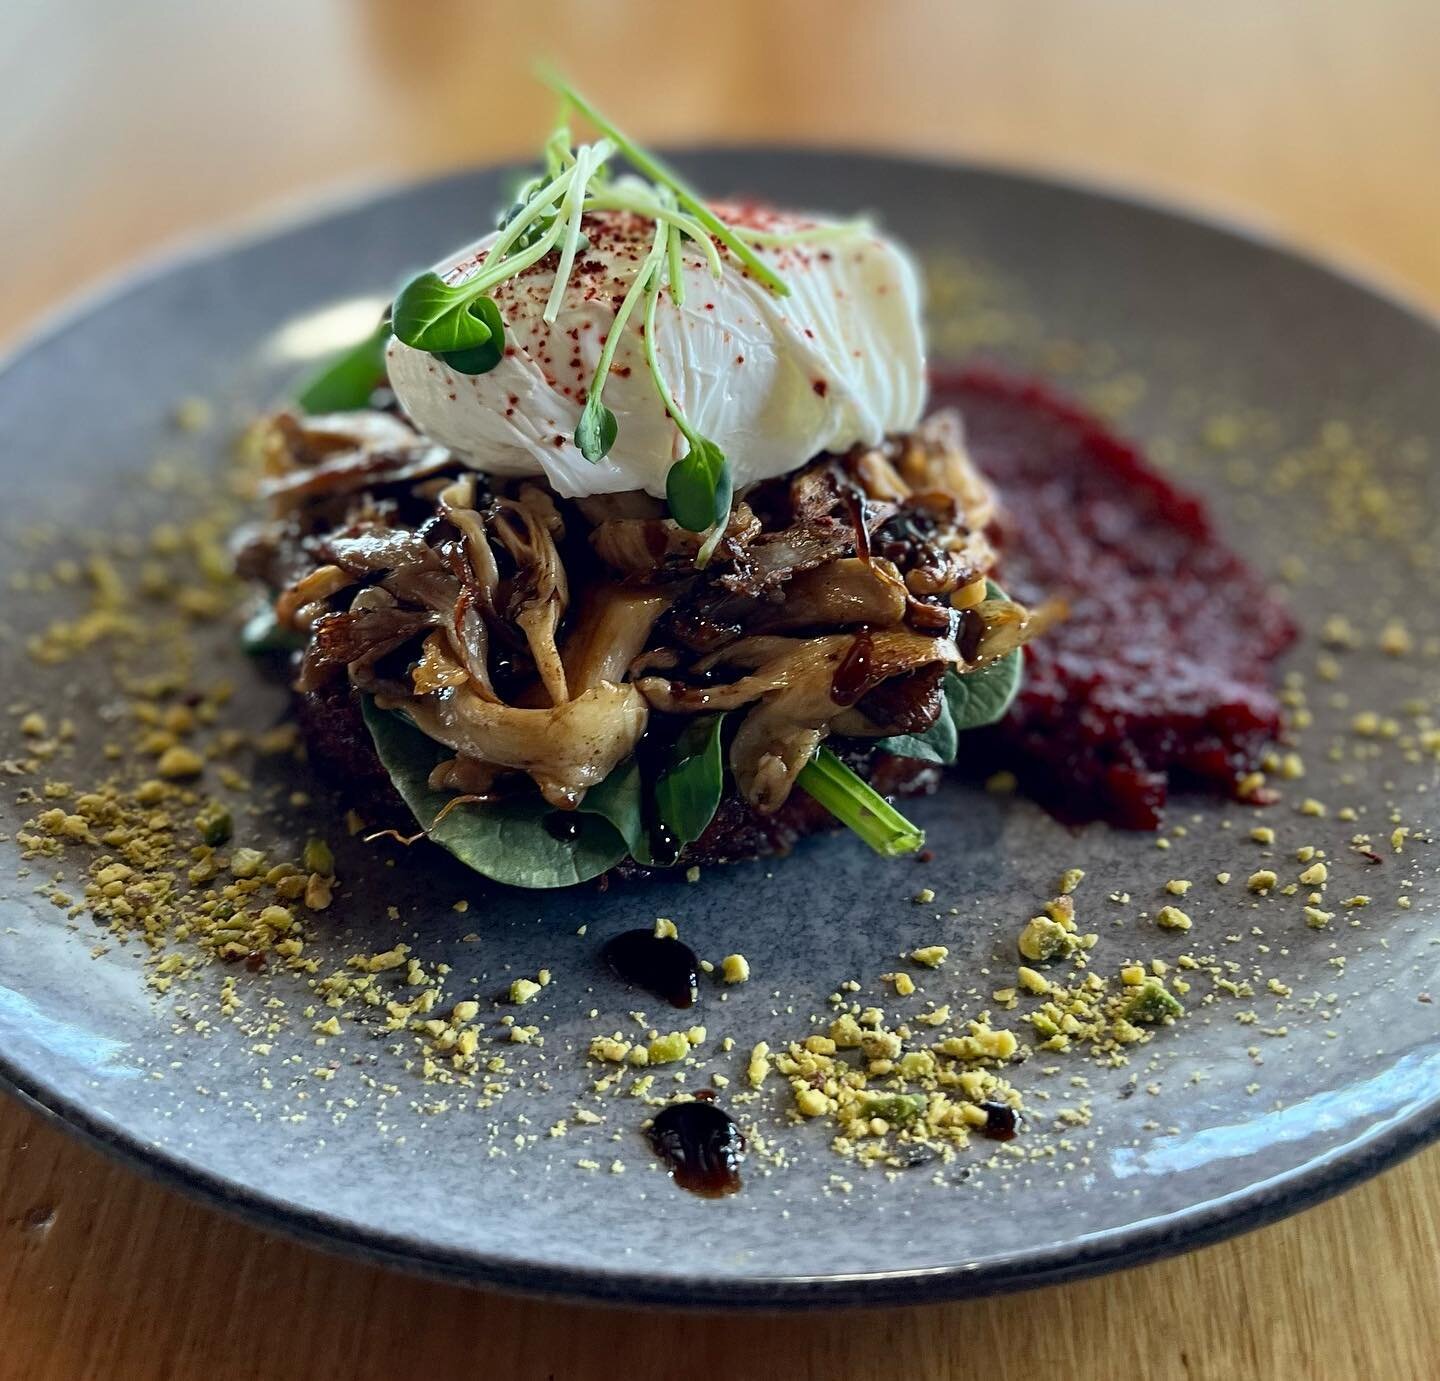 Come in and try our magic mushrooms for breaky  Locally grown gourmet mushrooms, on a potato Rosti, baby spinach, Manning Valley free range egg, housecmade beetroot relish, a drizzle of balsamic truffle glaze and a sprinkle of pistachio dukkah for a 